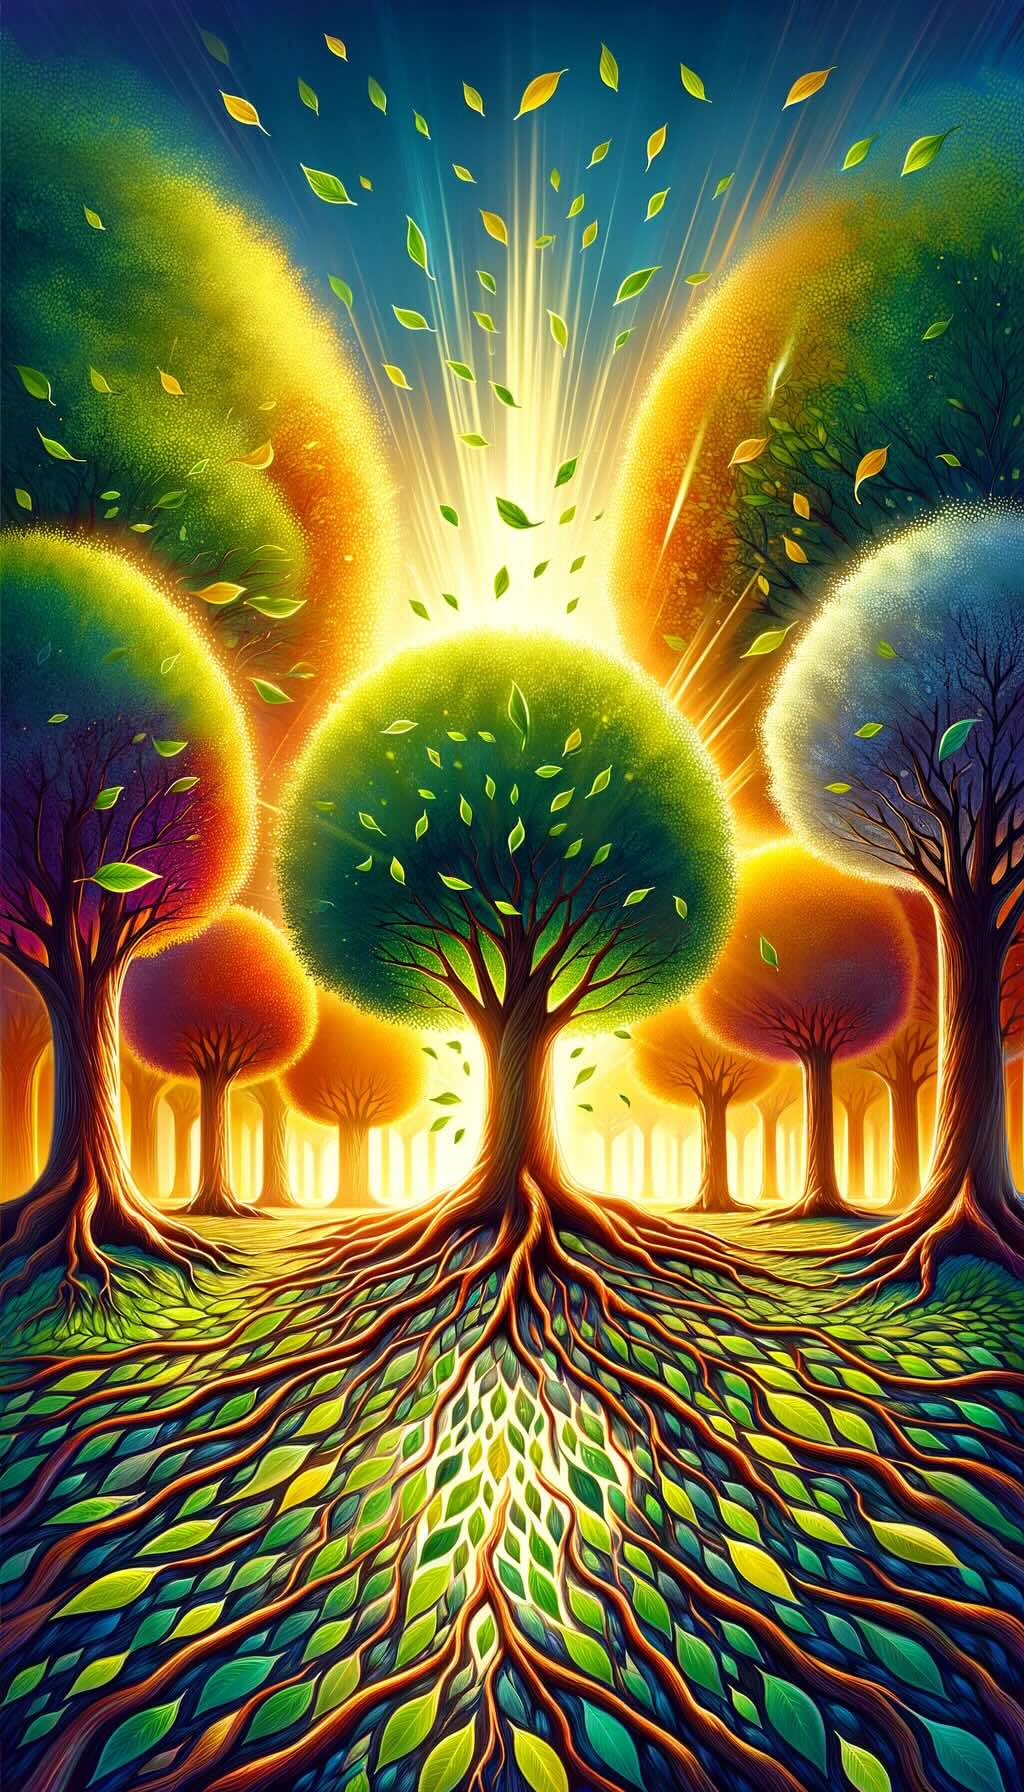 Concept of dividend reinvestment as a vibrant, ever-growing forest, symbolizing the compounding growth of an investor's portfolio. Each tree and sapling represents individual investments, with reinvested dividends nurturing the portfolio's expansion. This colorful representation captures the prosperity and continuous growth enabled by effectively harnessing the power of reinvested dividends, offering a dynamic visualization of long-term financial growth beyond the traditional maritime themes.